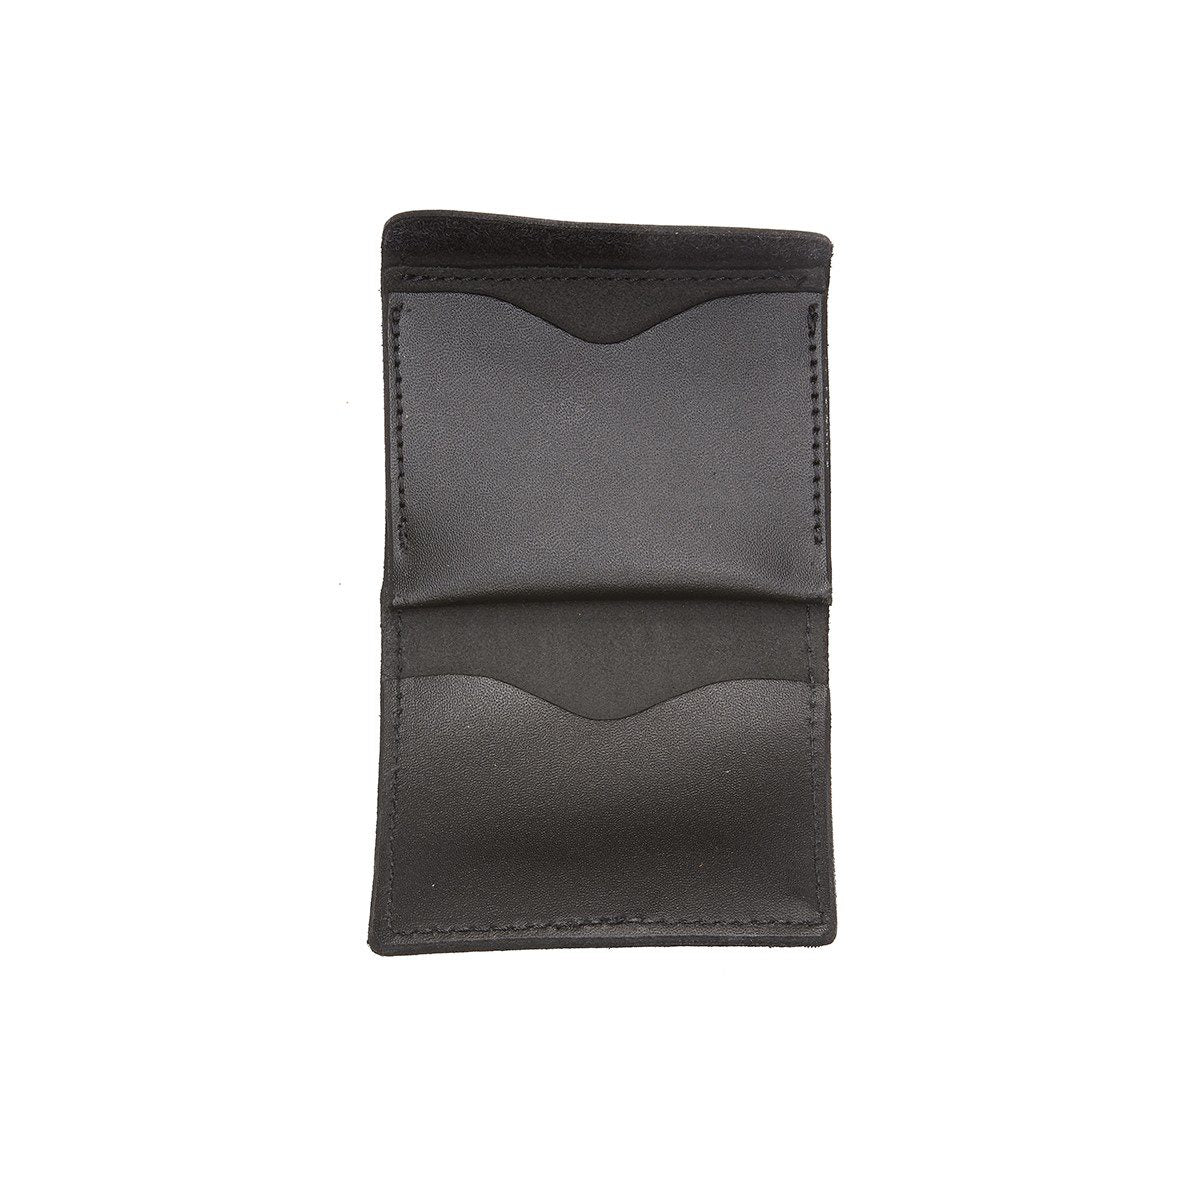 Aker Leather 557 Velcro Surgical Glove Pouch for 2.25